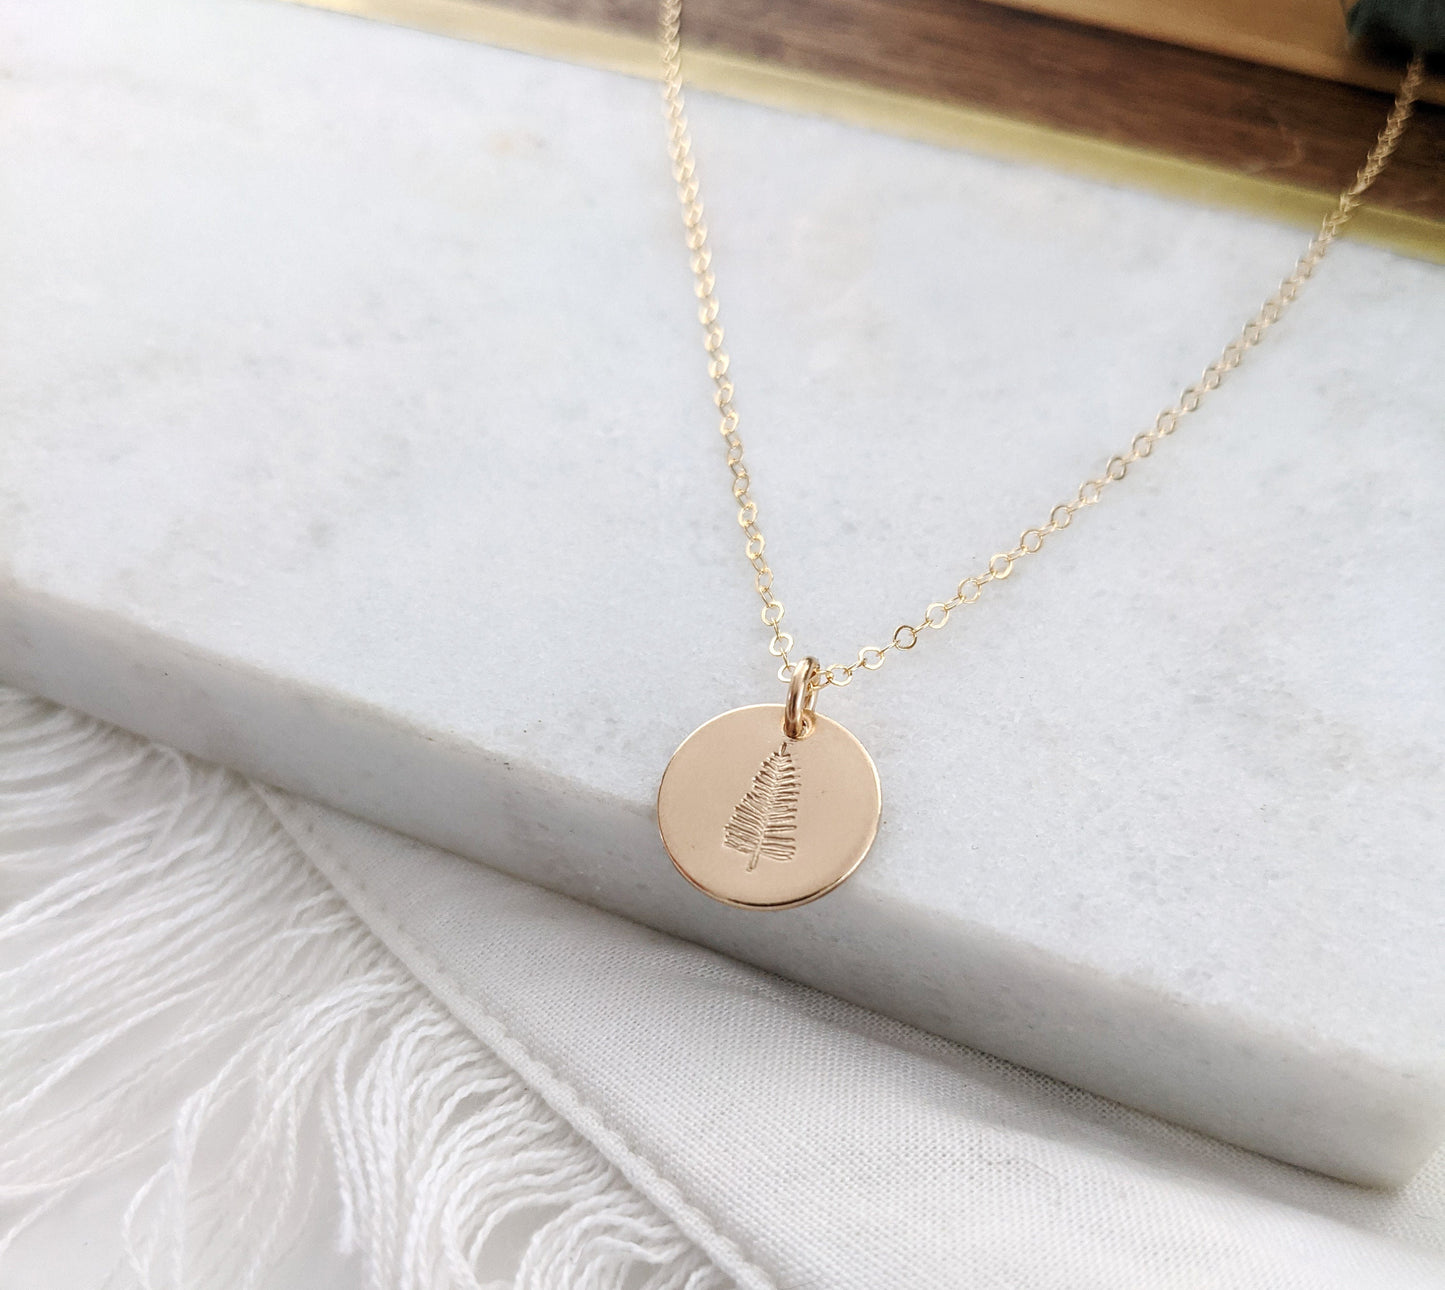 Pine Tree Necklace | Necklace for Strength